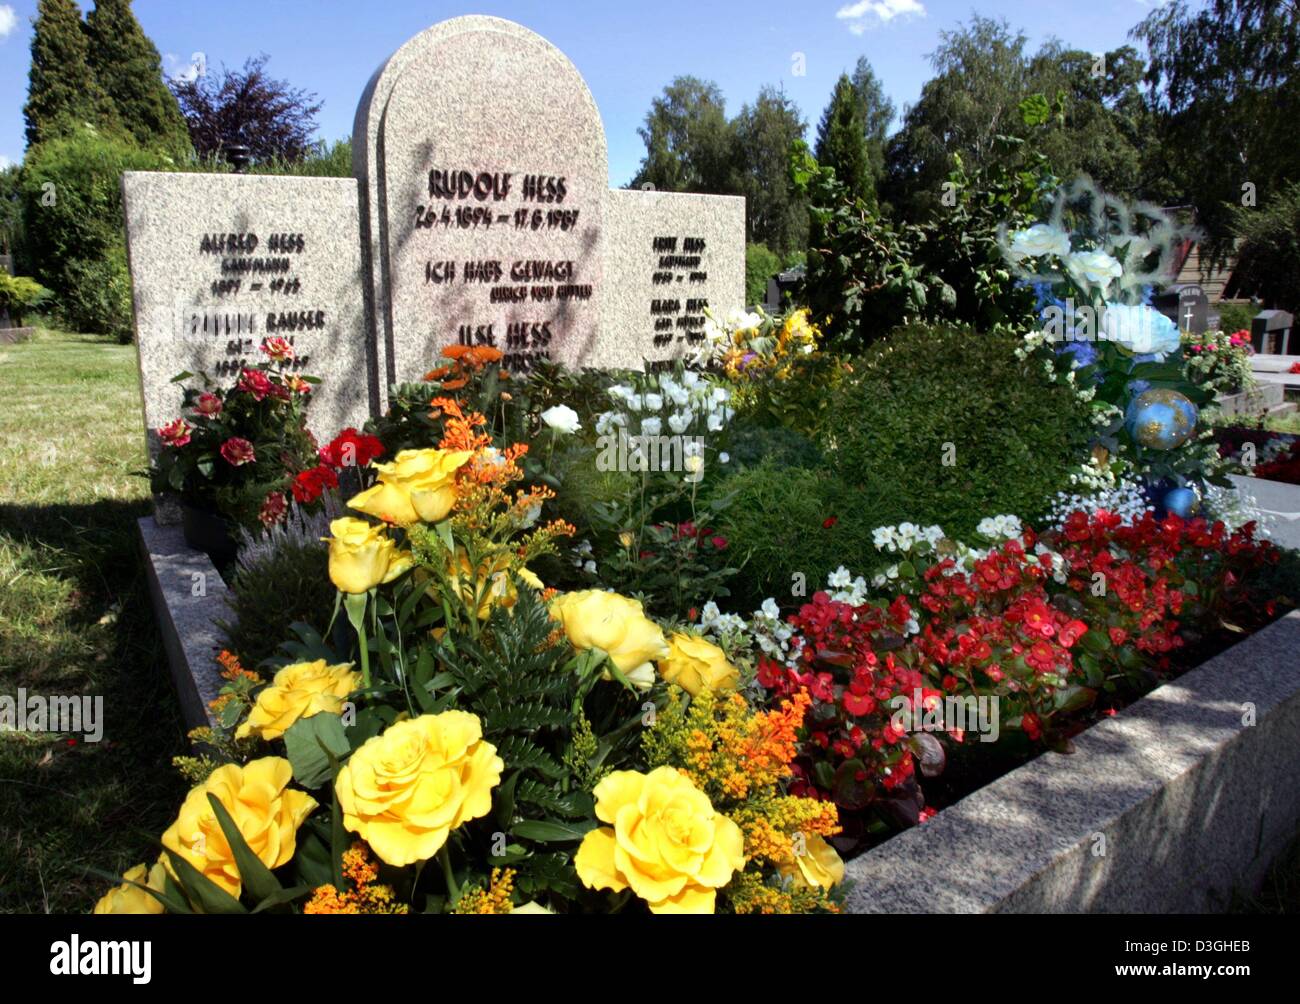 (dpa) - A view of the grave of Adolf Hitler's deputy Rudolf Hess in Wundsiedel, Germany, 18 August 2004. Hess was born on 26 April 1894 and died on 17 August 1987. Every year around 2,500 Nazis gather in the little town of Wundsiede to commemorate 'Friedensflieger' (peace pilot) Rudolf Hess. Stock Photo